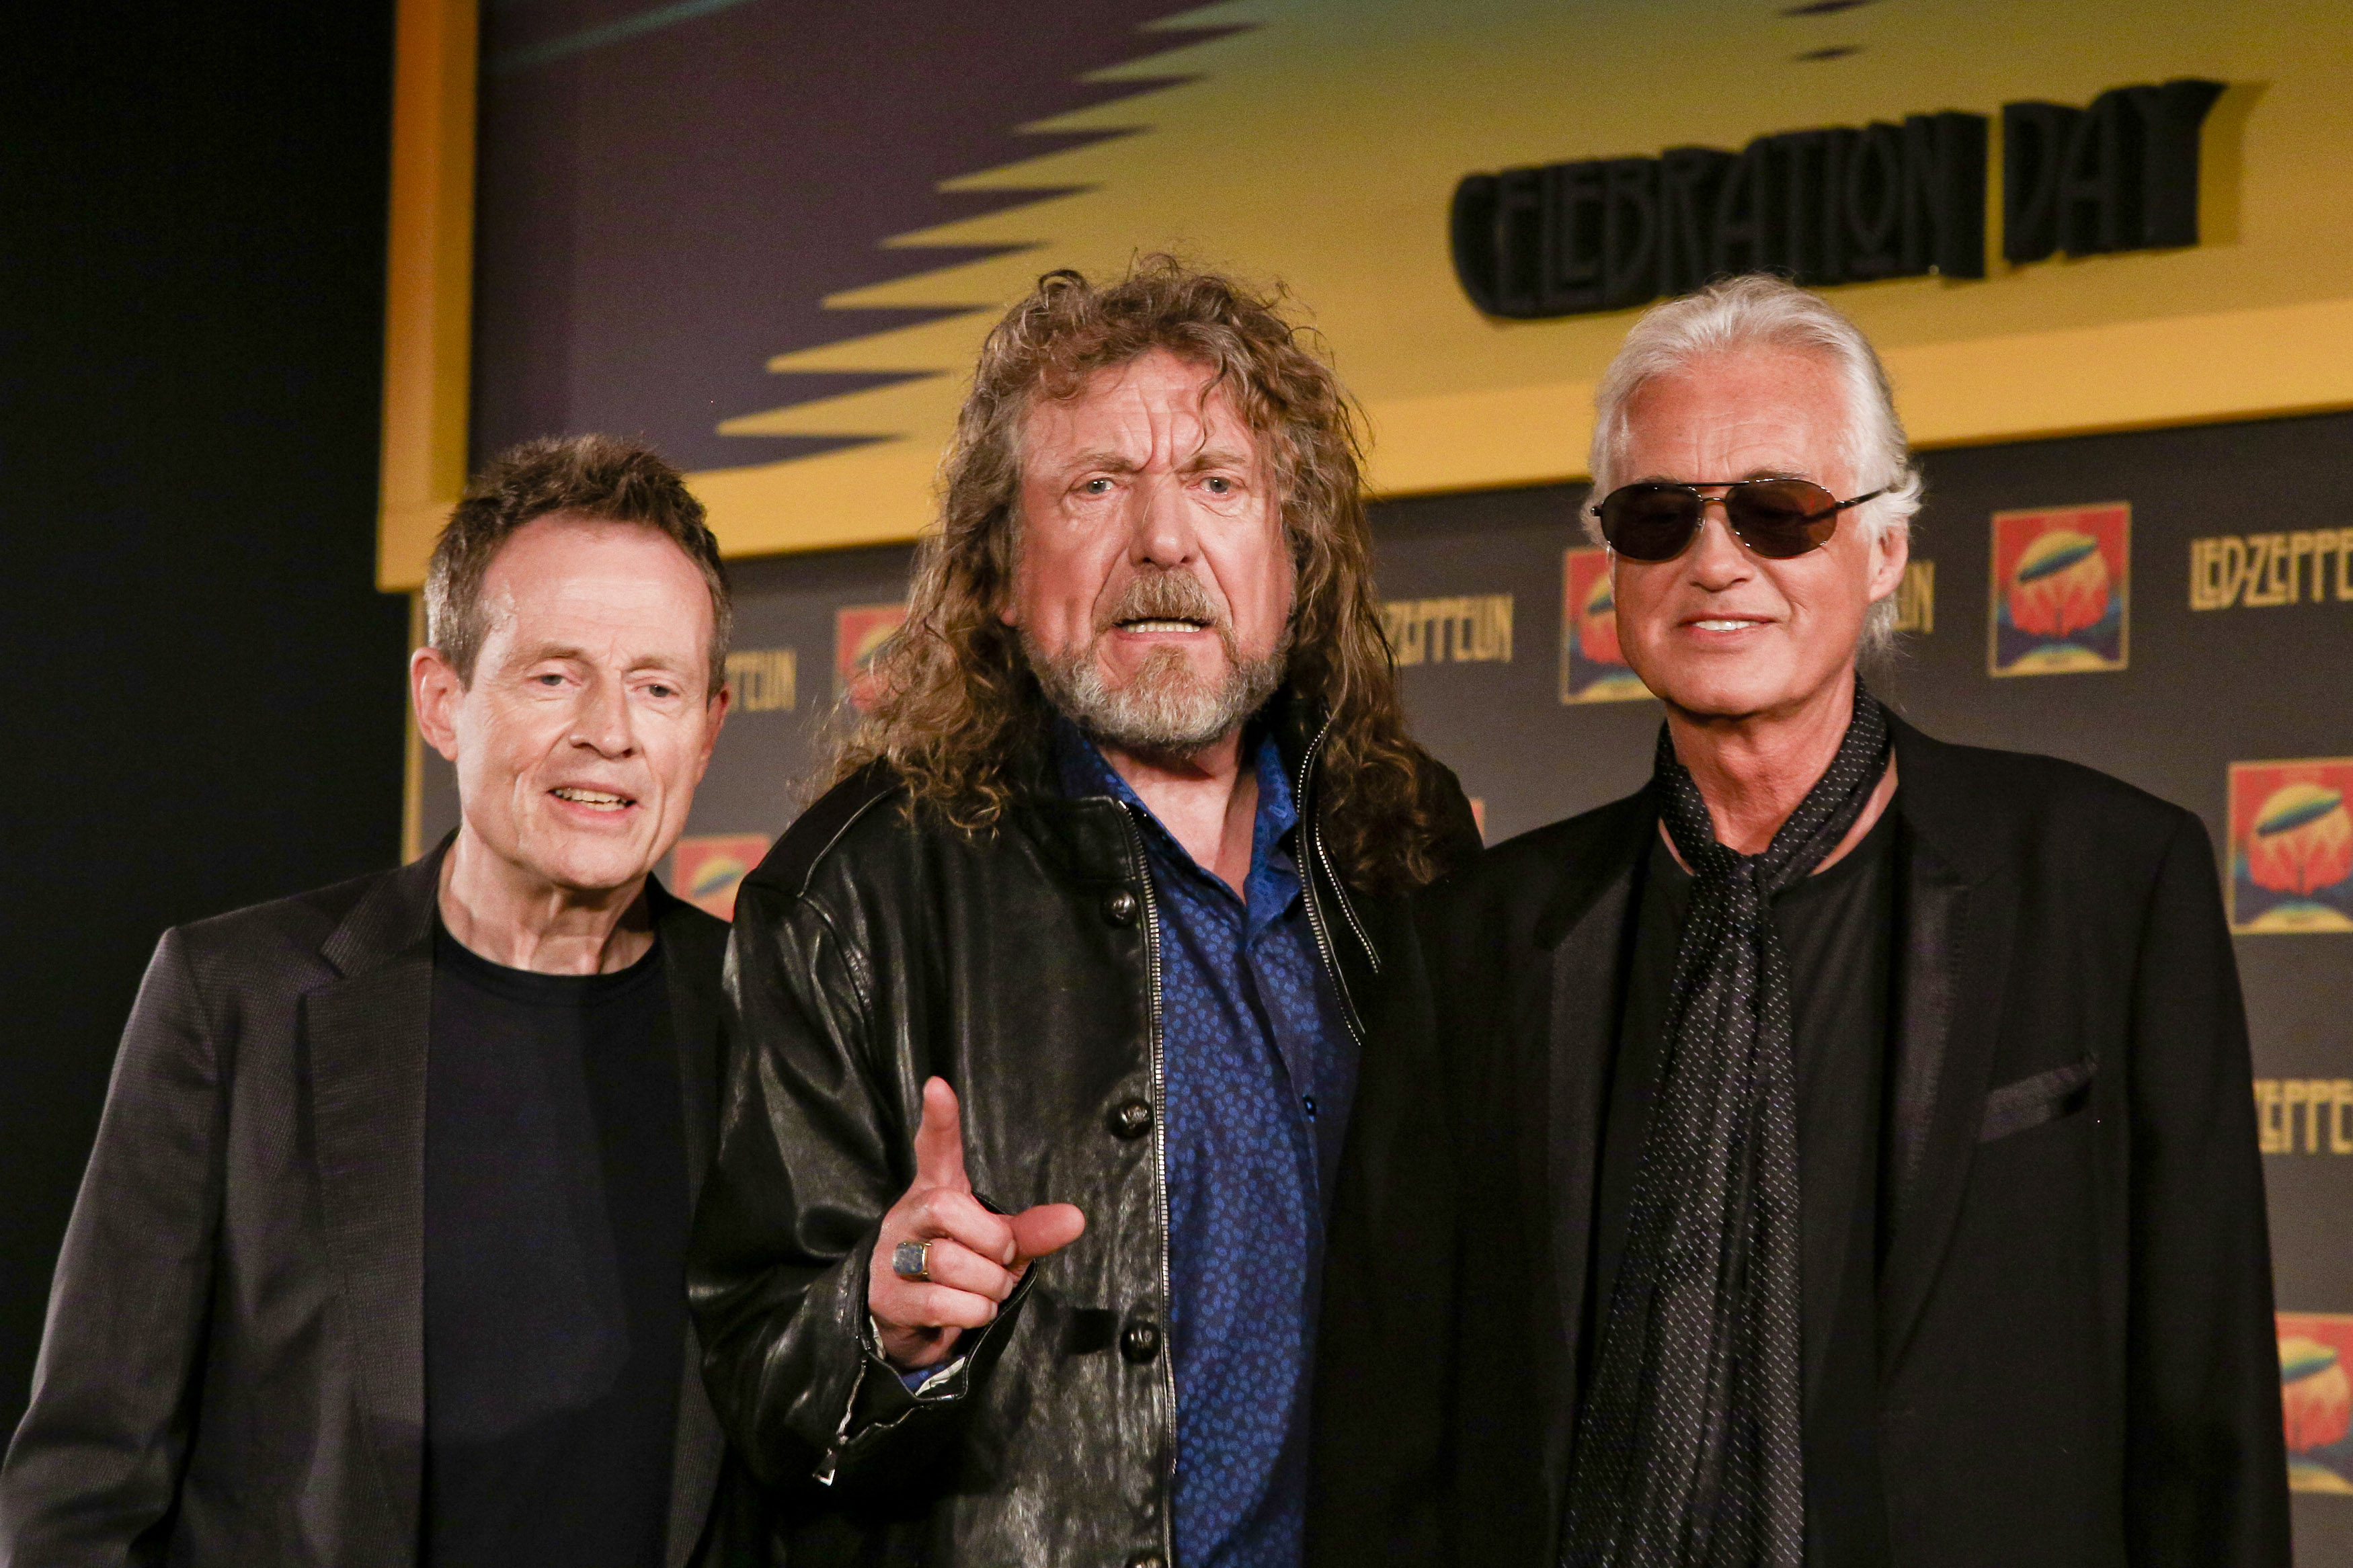 advantageous Haiku Person in charge of sports game Led Zeppelin loses first round in "Stairway to Heaven" plagiarism lawsuit -  CBS News